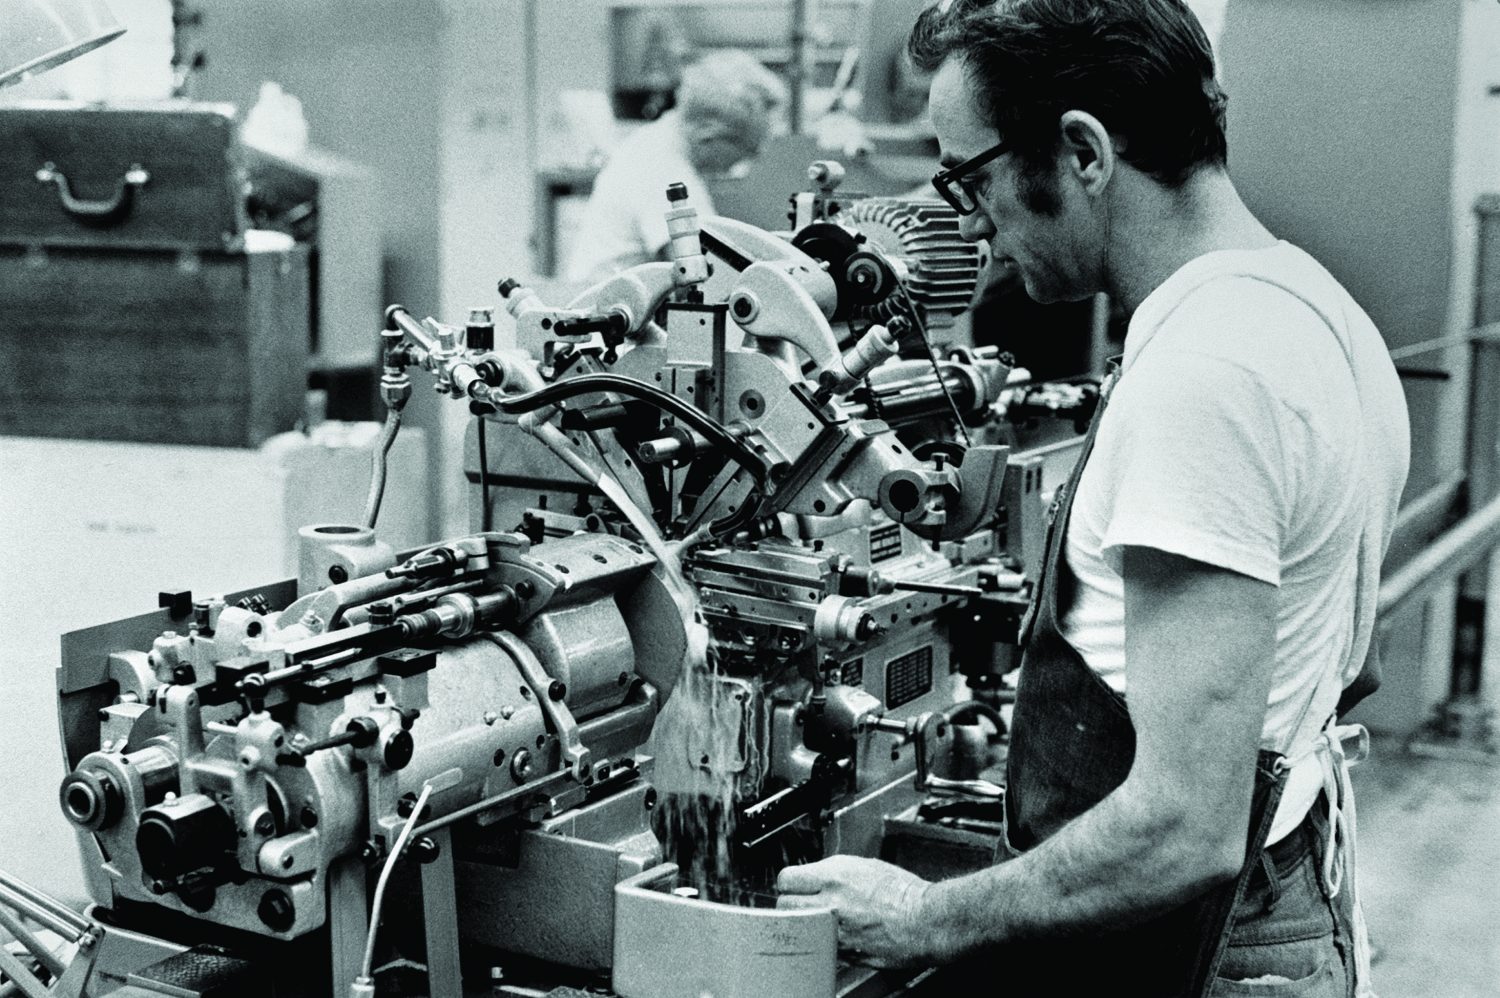 A man working at the Swiss screw machine in 1972.